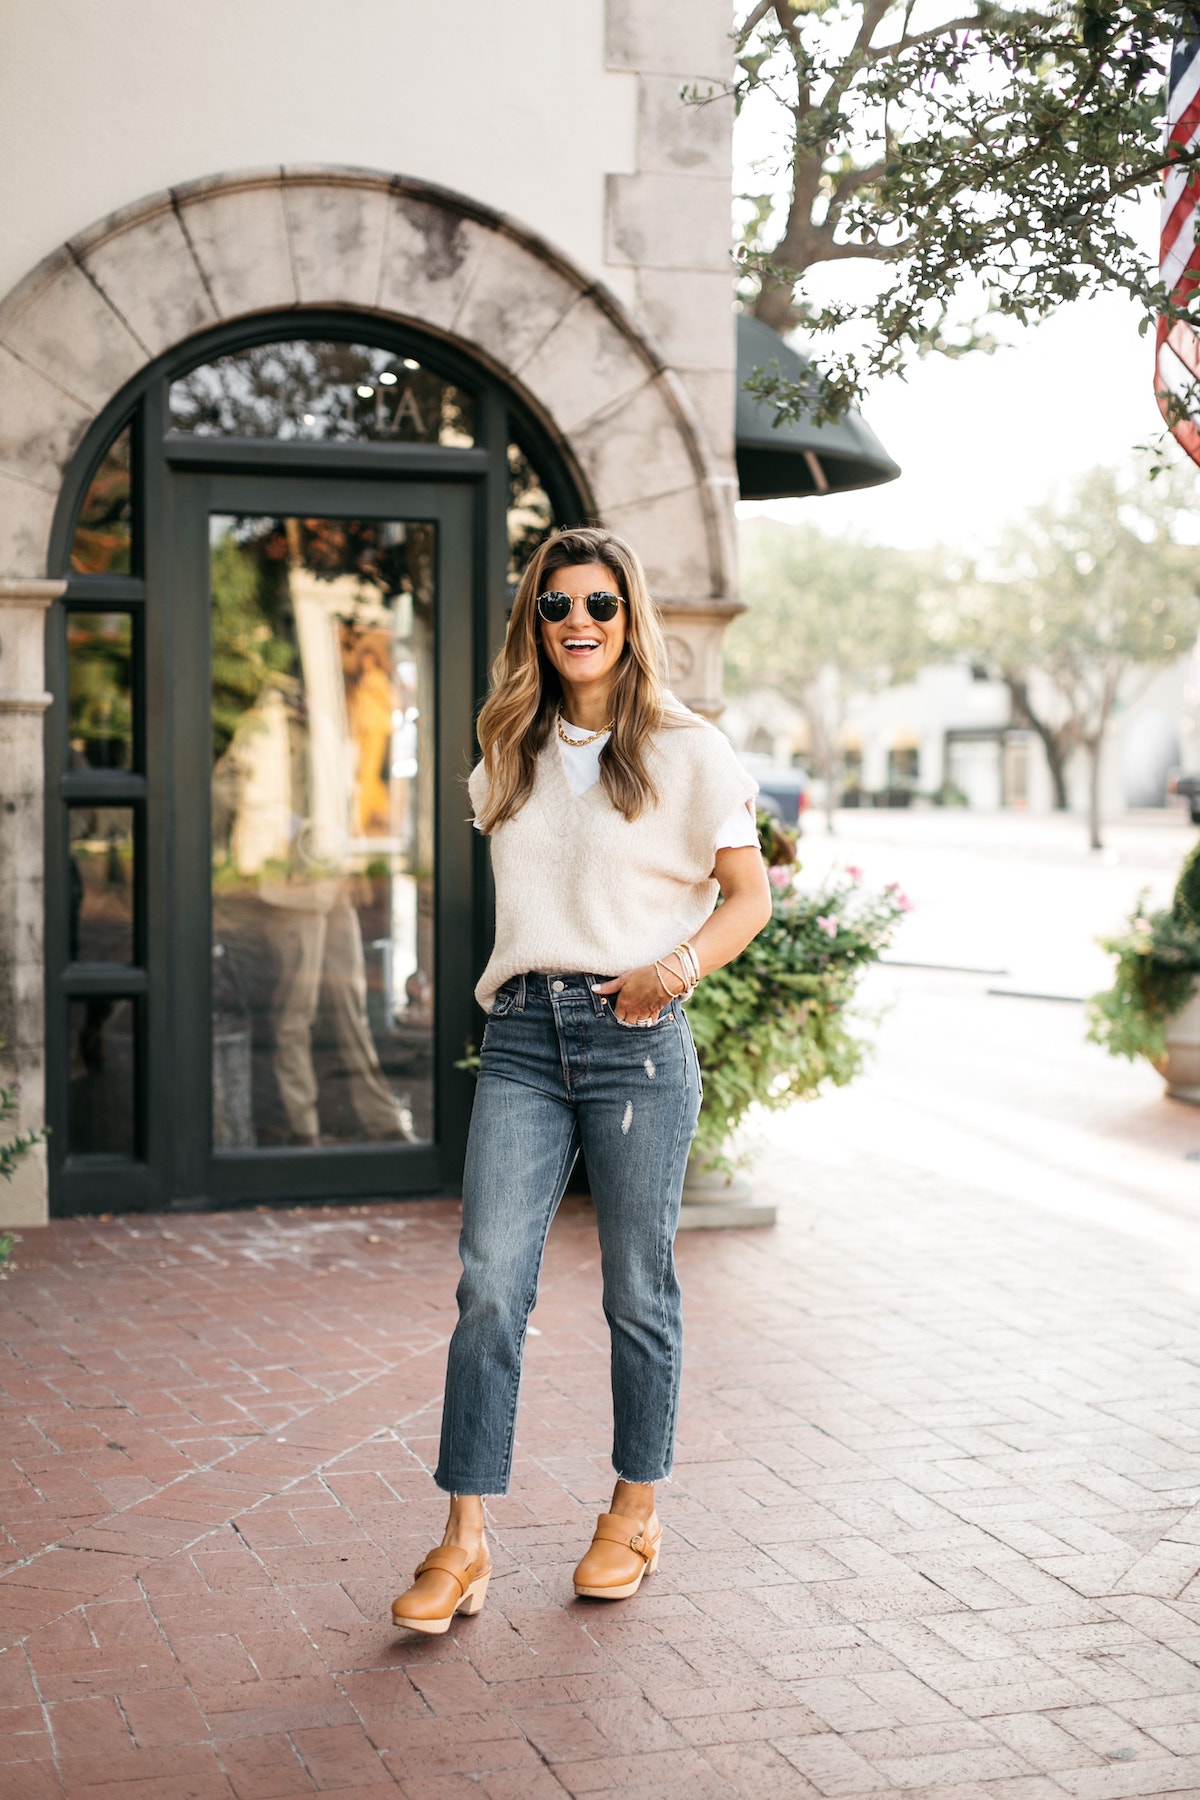 Brighton Butler wearing sweater vest layered over white tee, Levi's denim, clogs, sweater vest trend